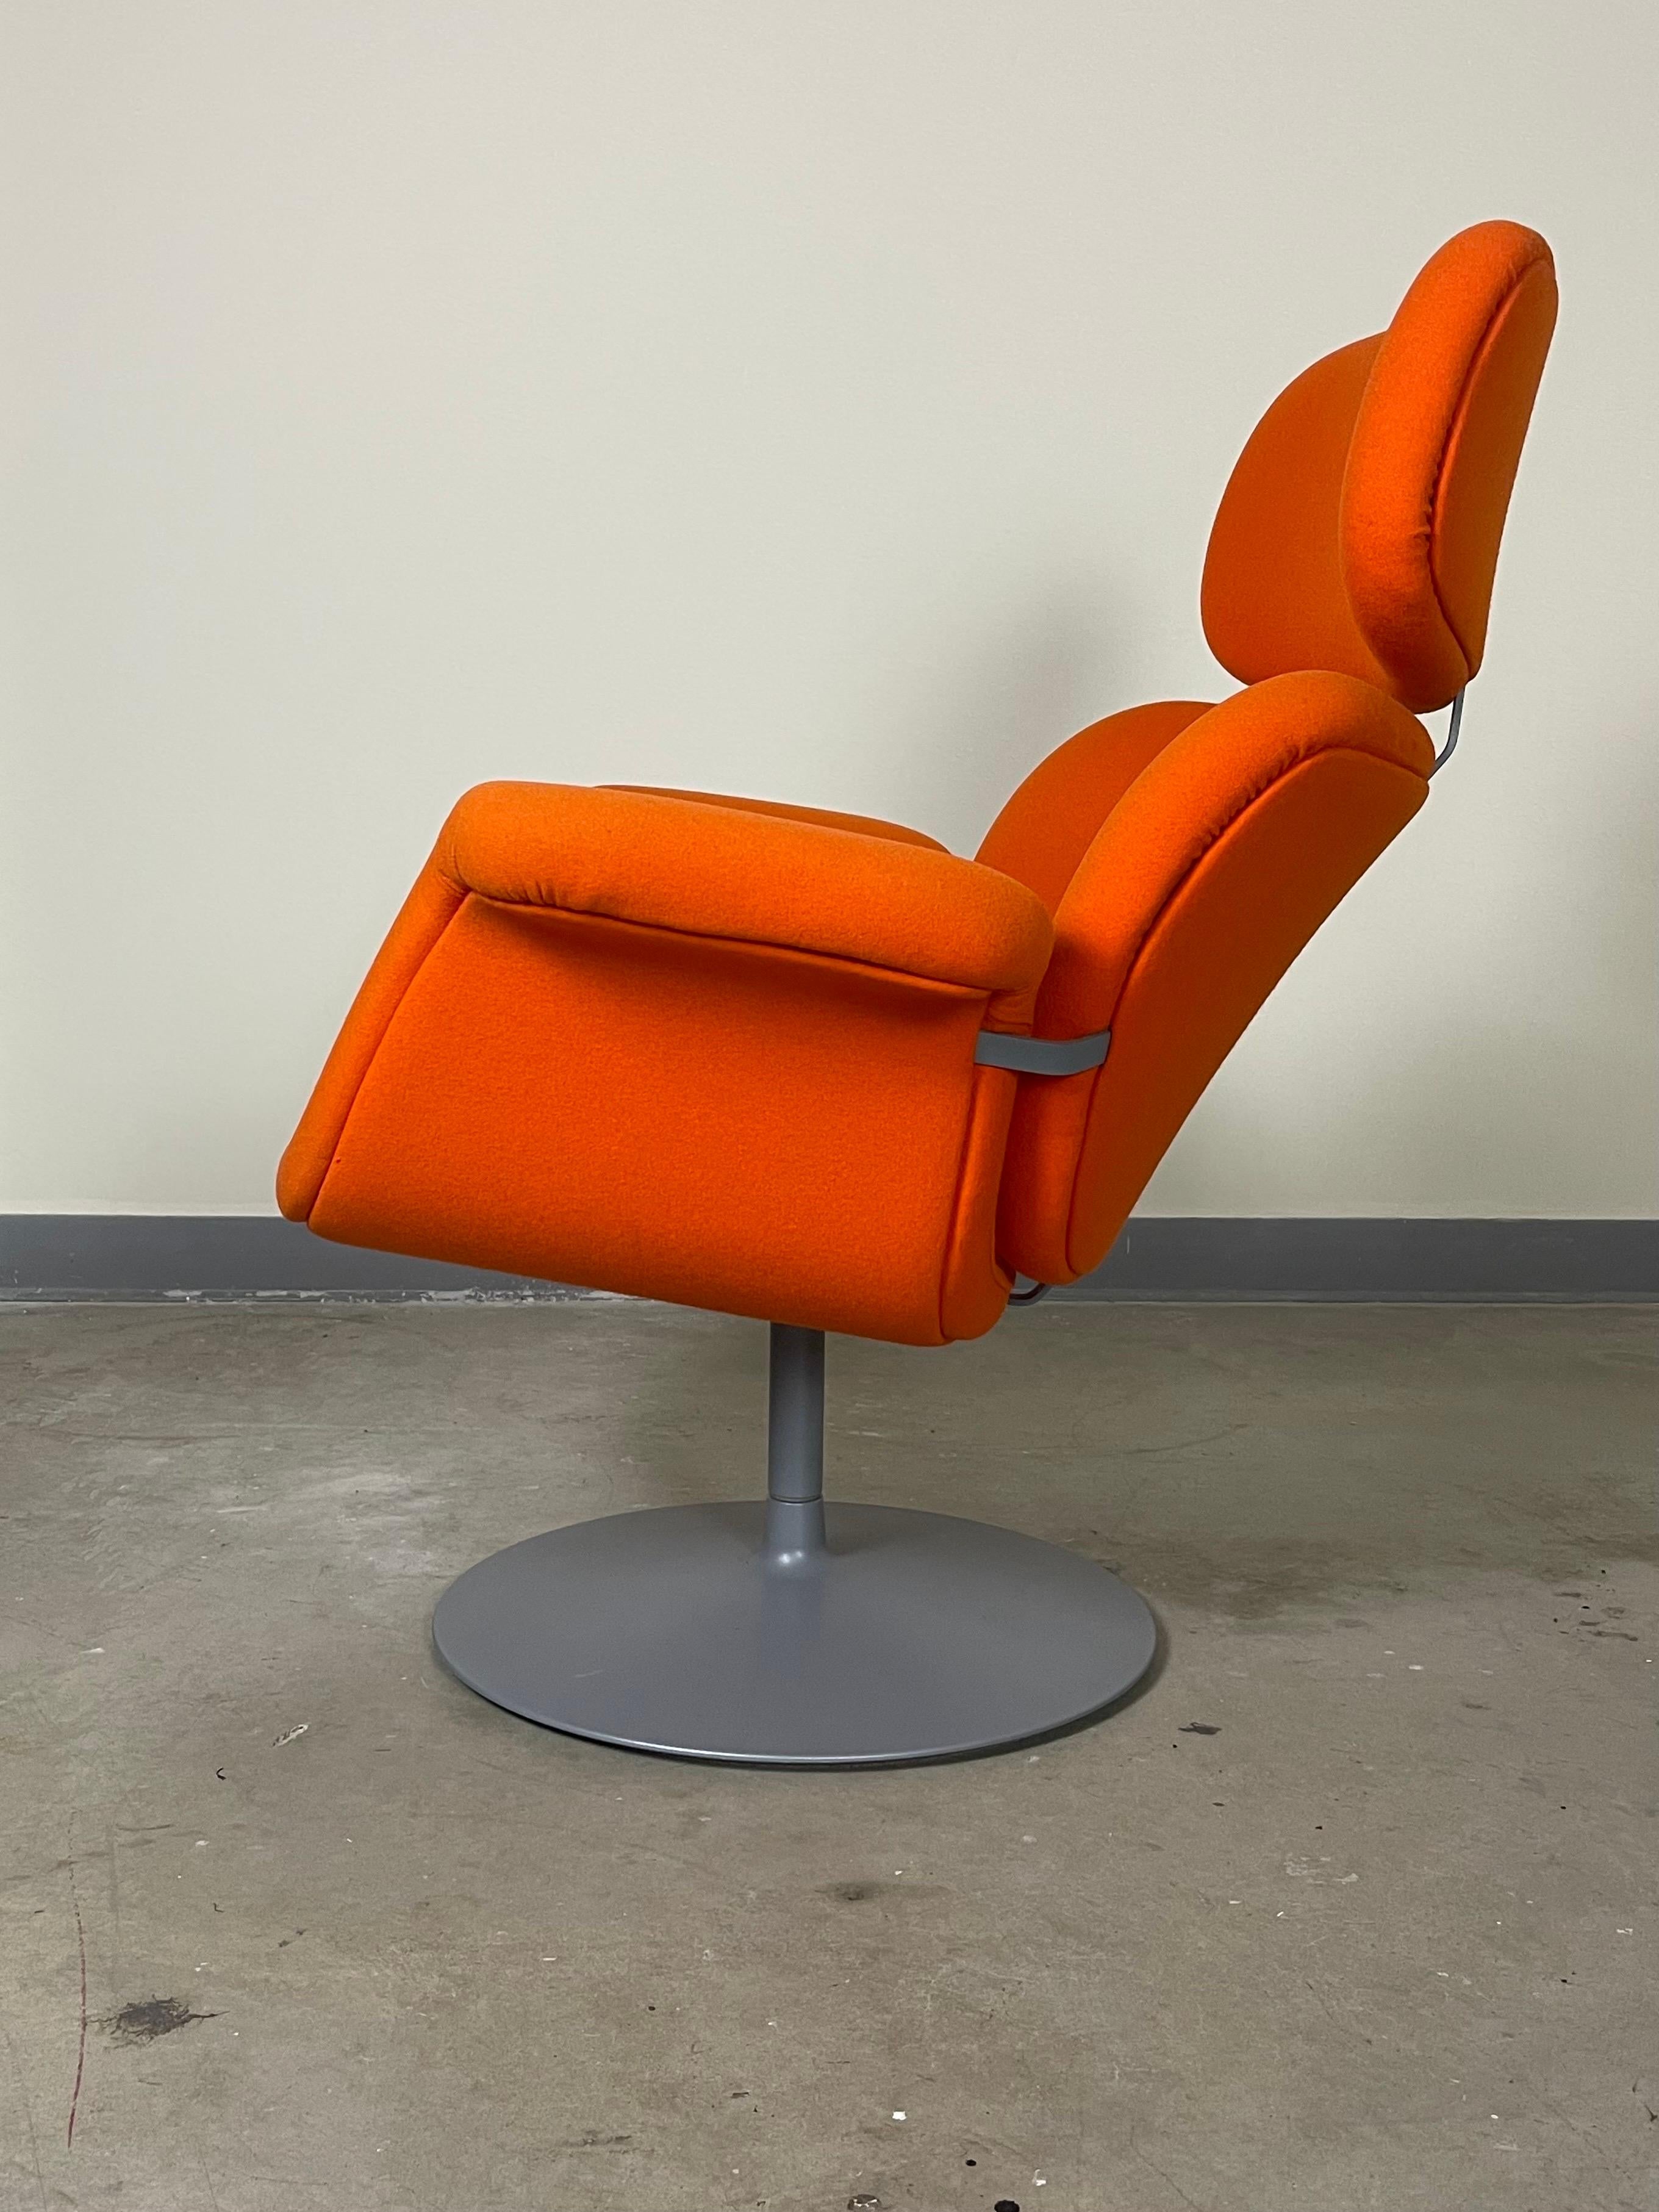 Pierre Paulin for Artifort “Big Tulip” chair in original bright orange wool. This piece is a newer production- this chair was originally designed in 1965 by Paulin and produced by Artifort in Holland. Wool upholstery has some minor imperfections